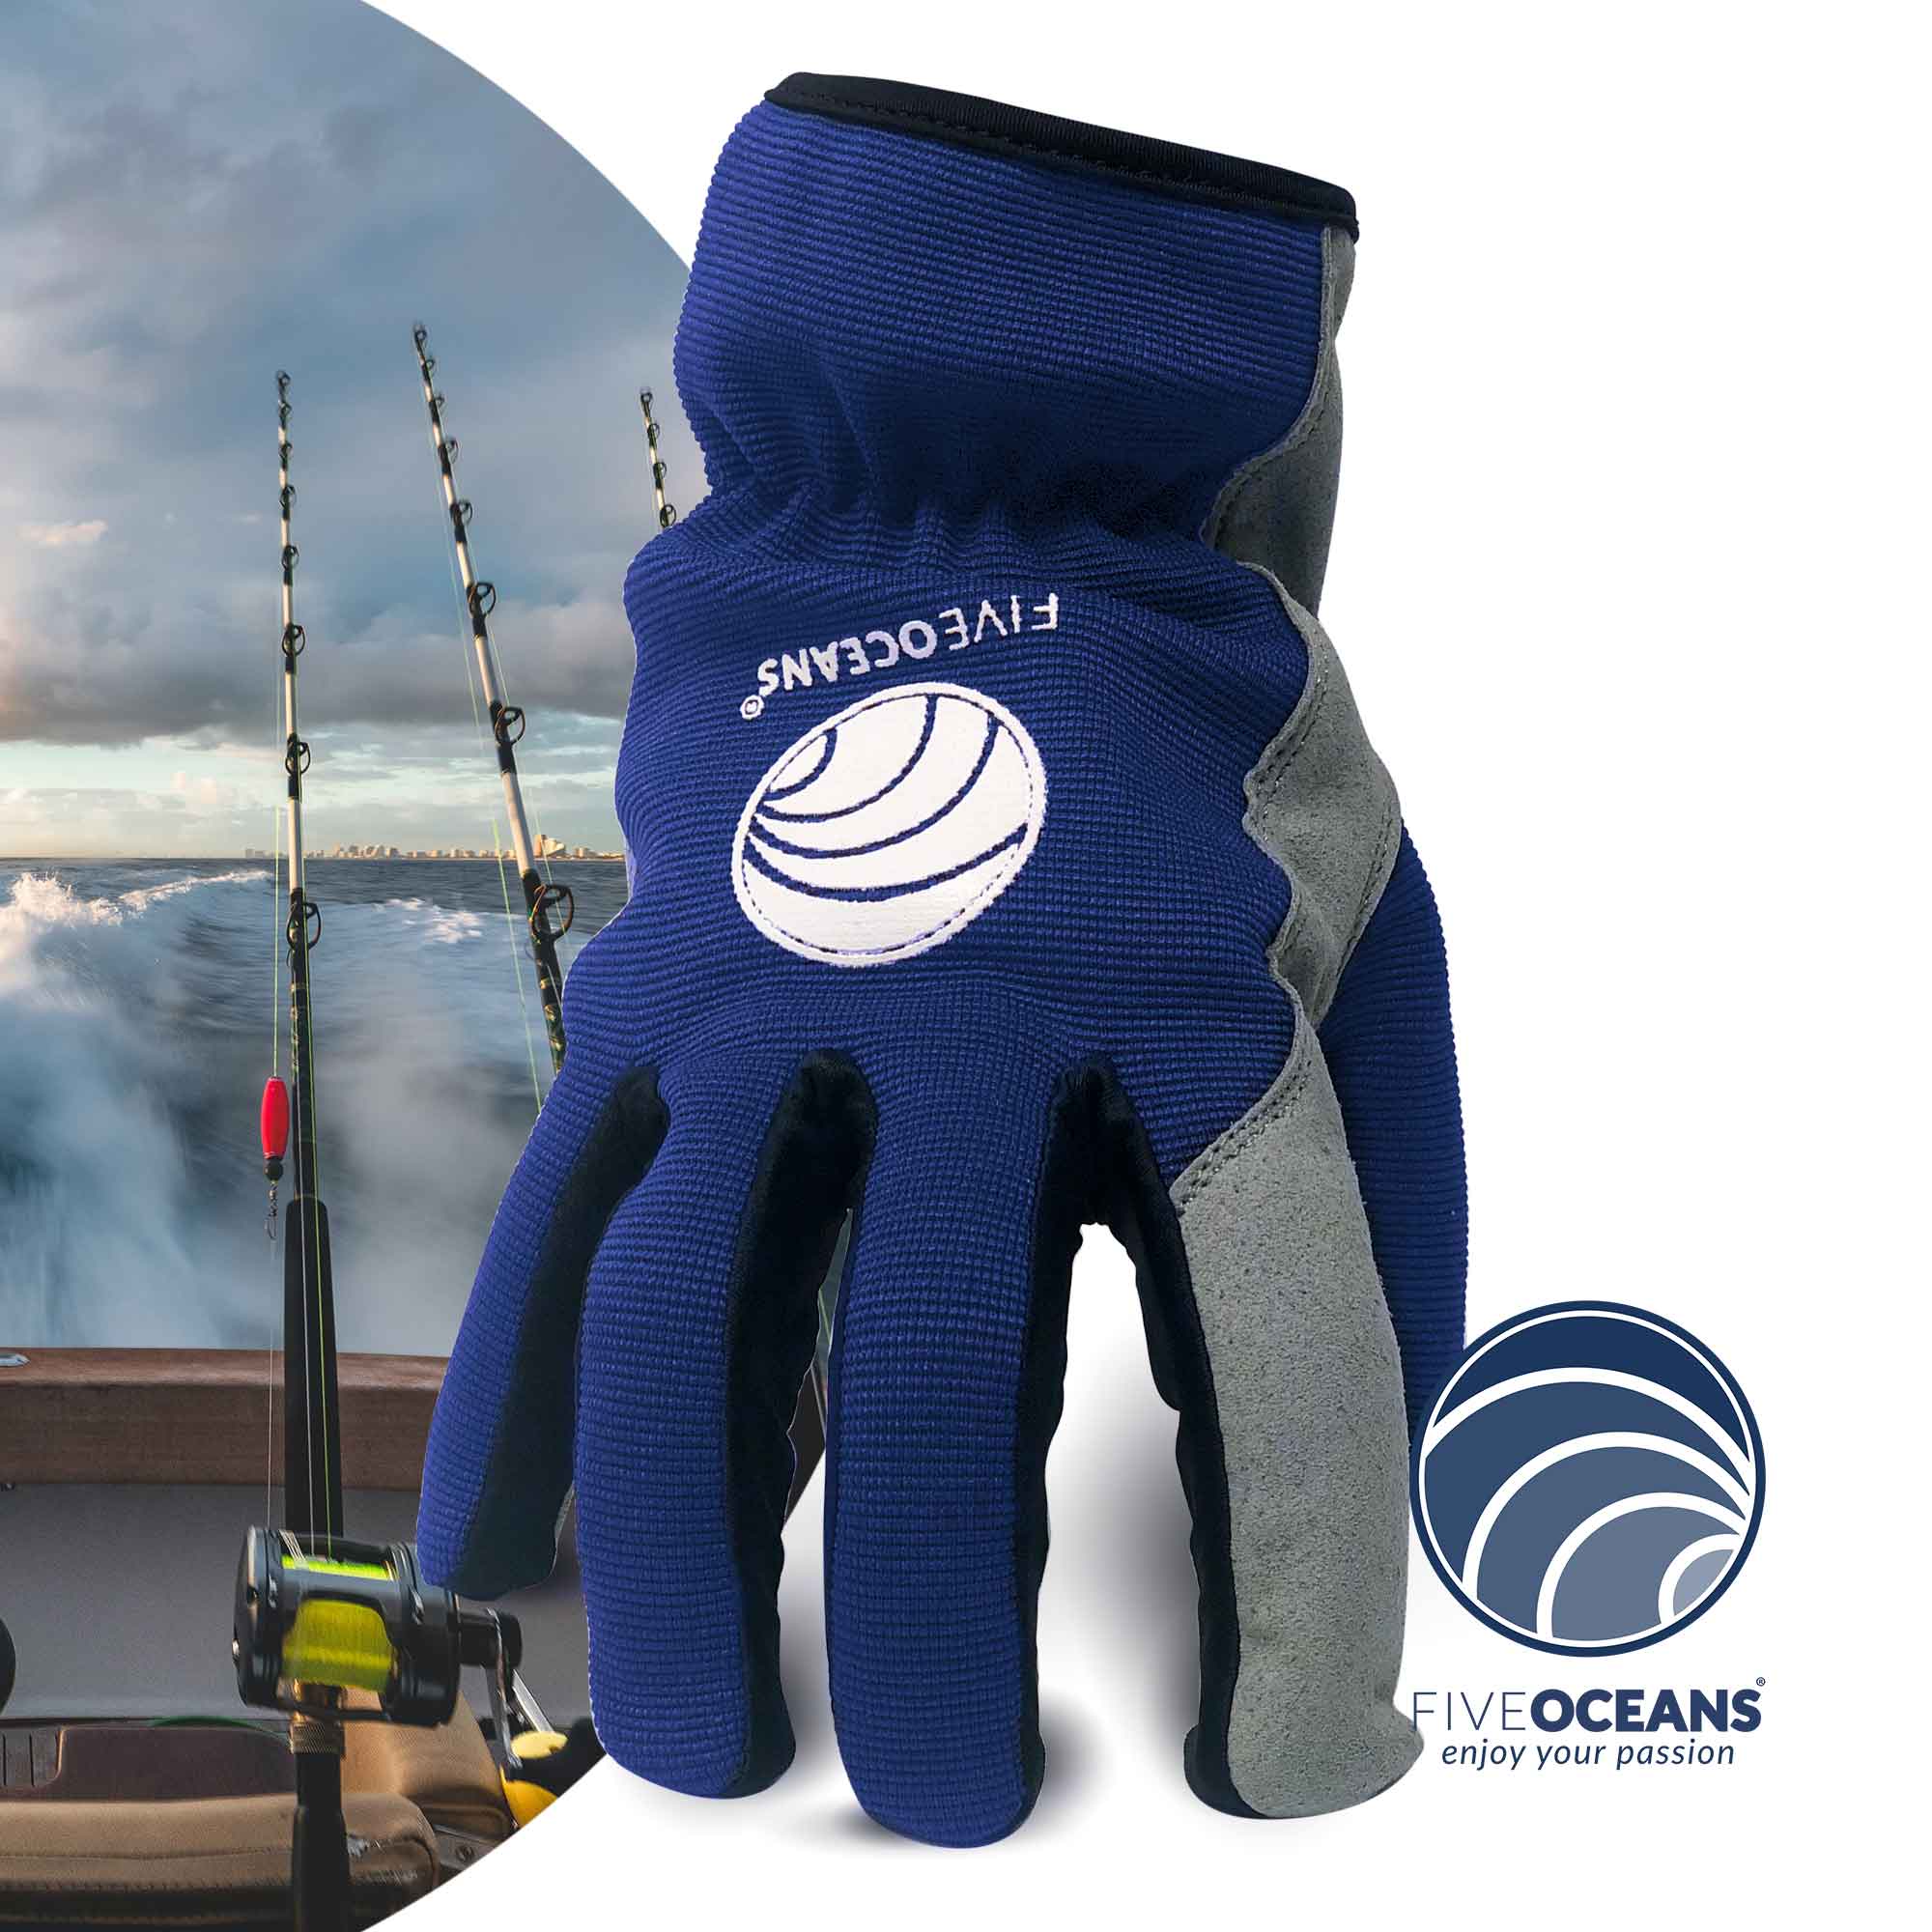 Fishing Gloves, L Size - FO4399